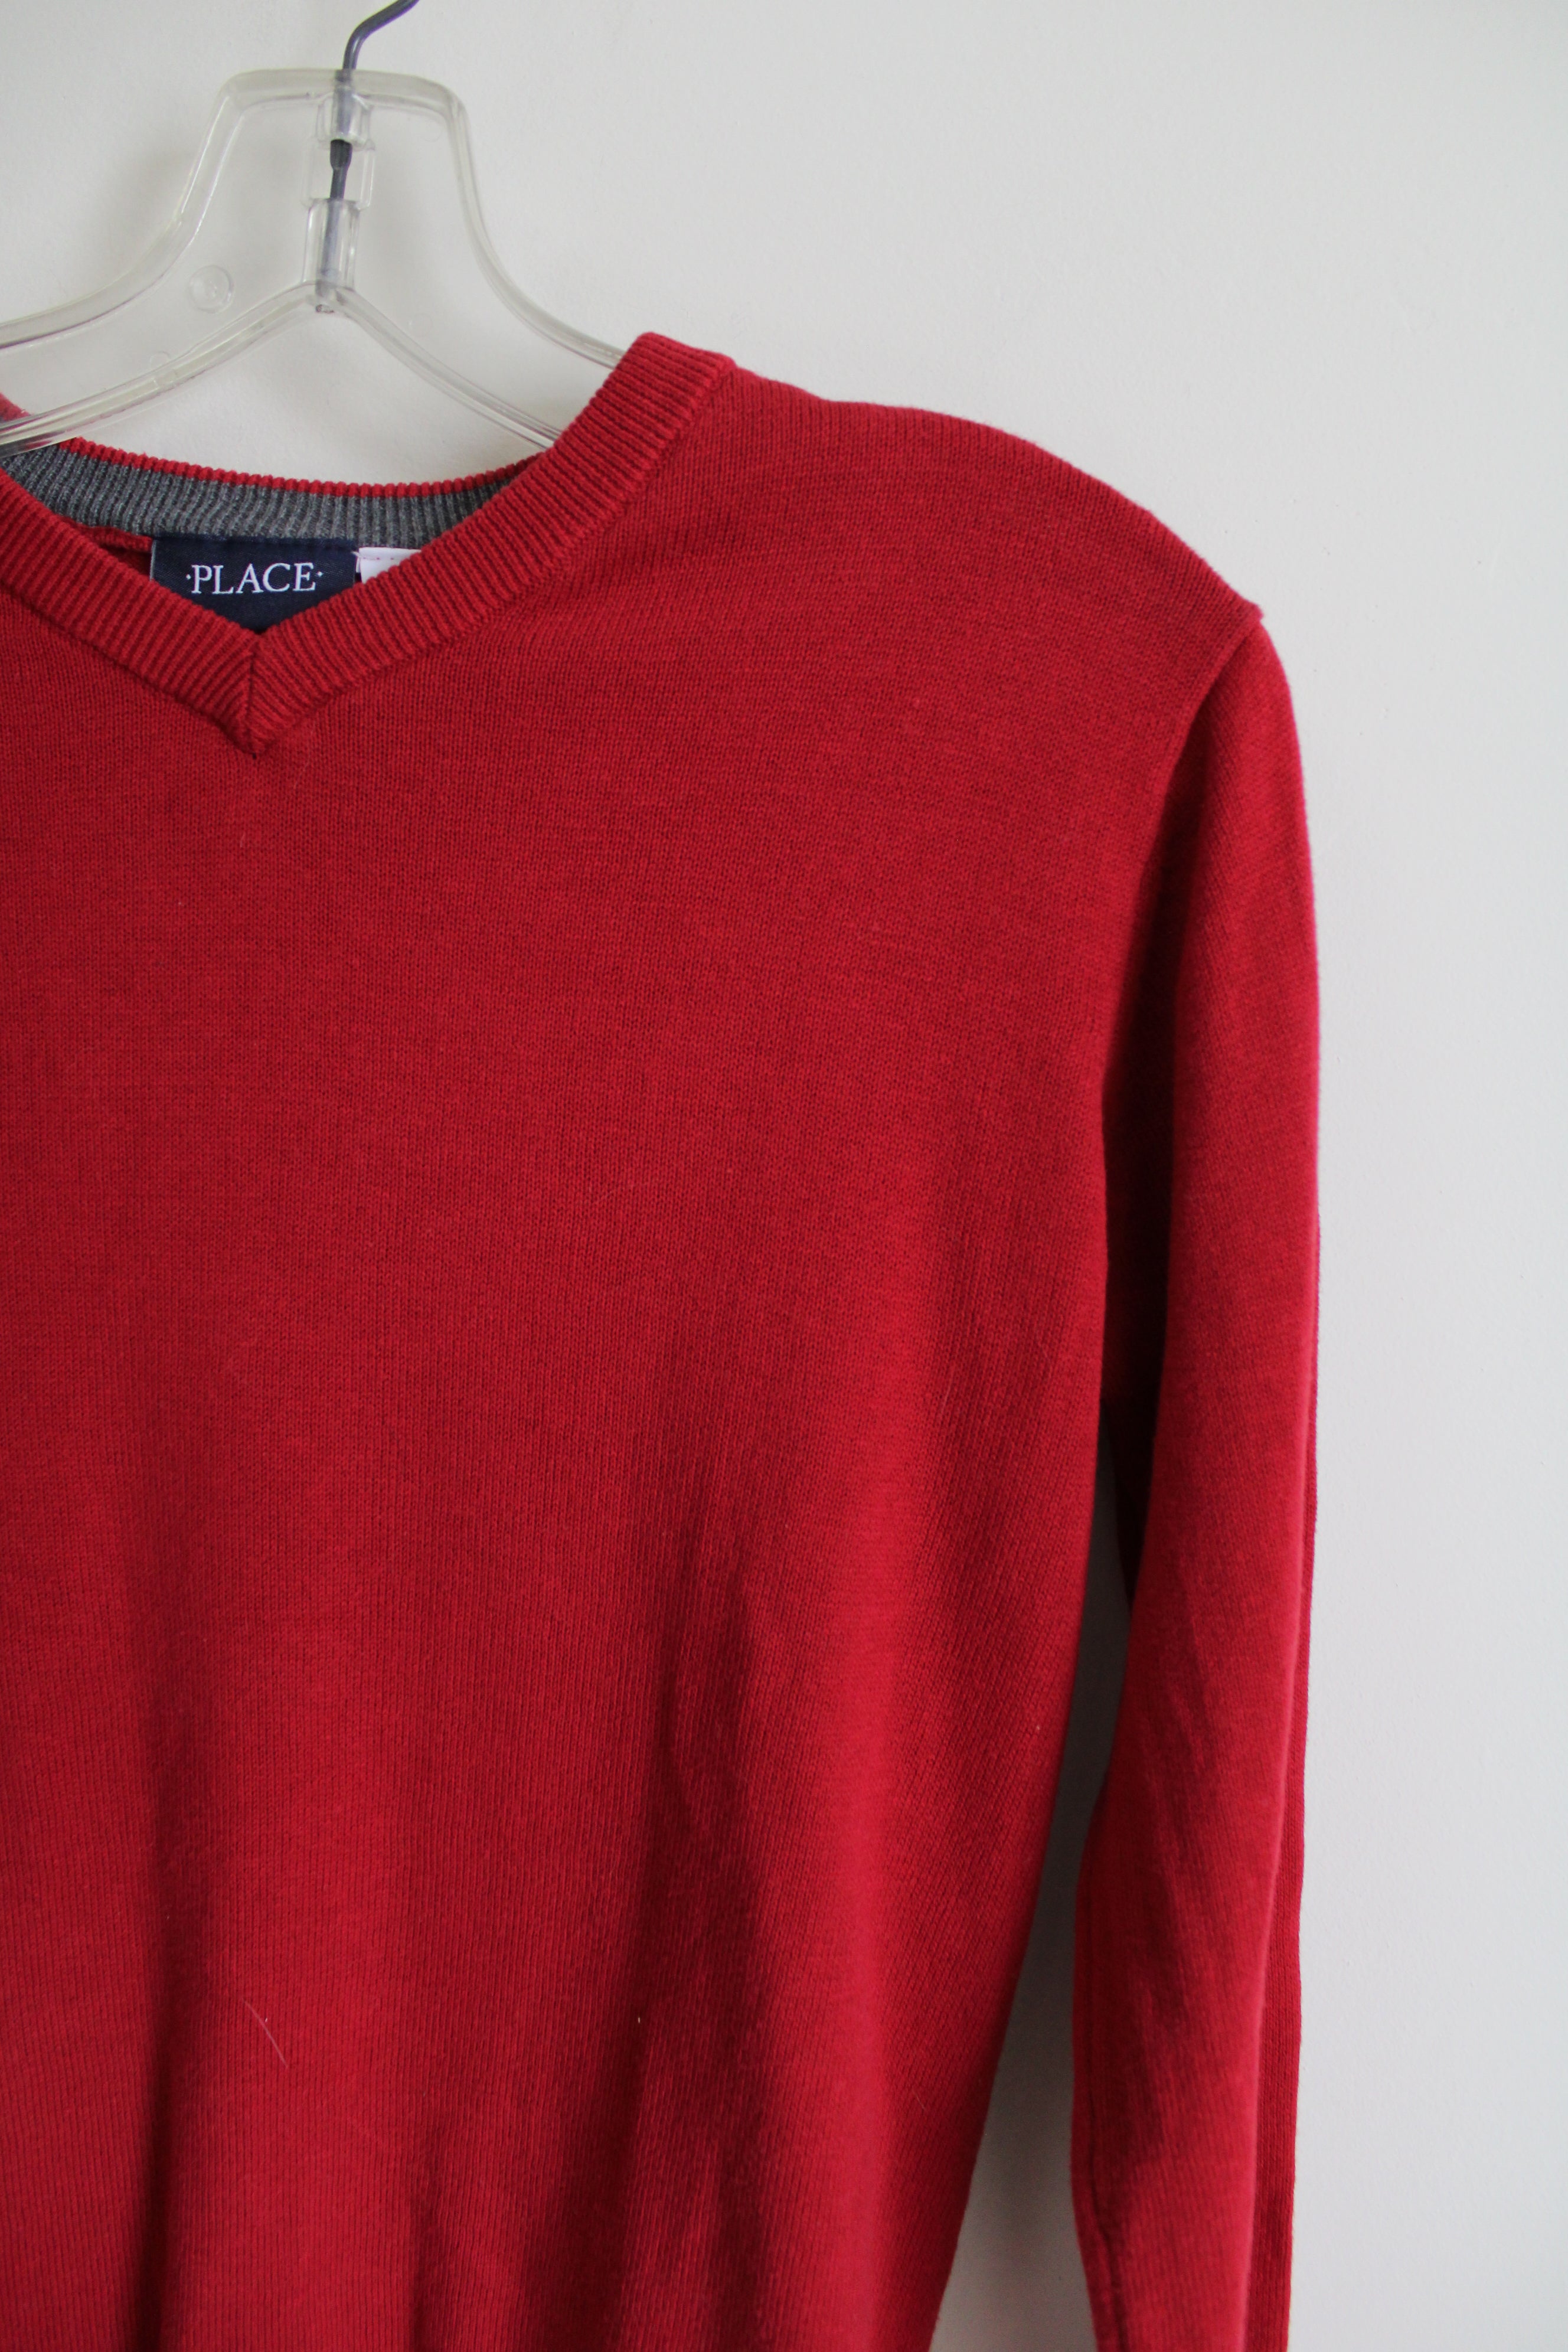 Children's Place Red Knit Sweater | 10/12